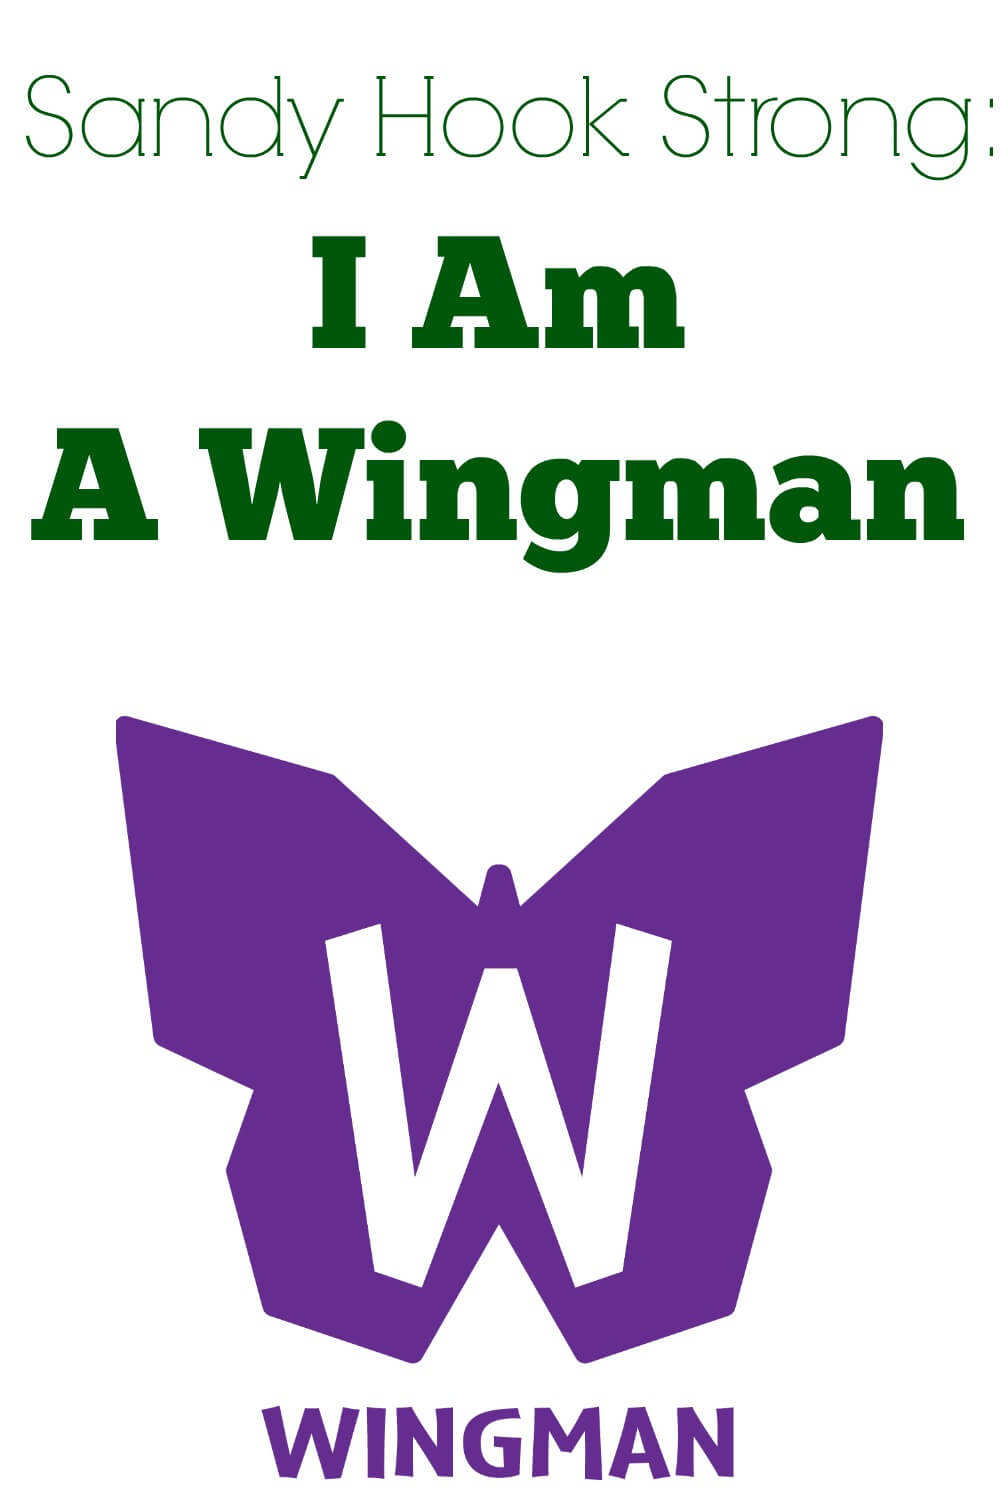 The Wingman Program was developed after the tragedy at Sandy Hook. Check out how 1 family is choosing love and inspiring others to be Sandy Hook Strong.